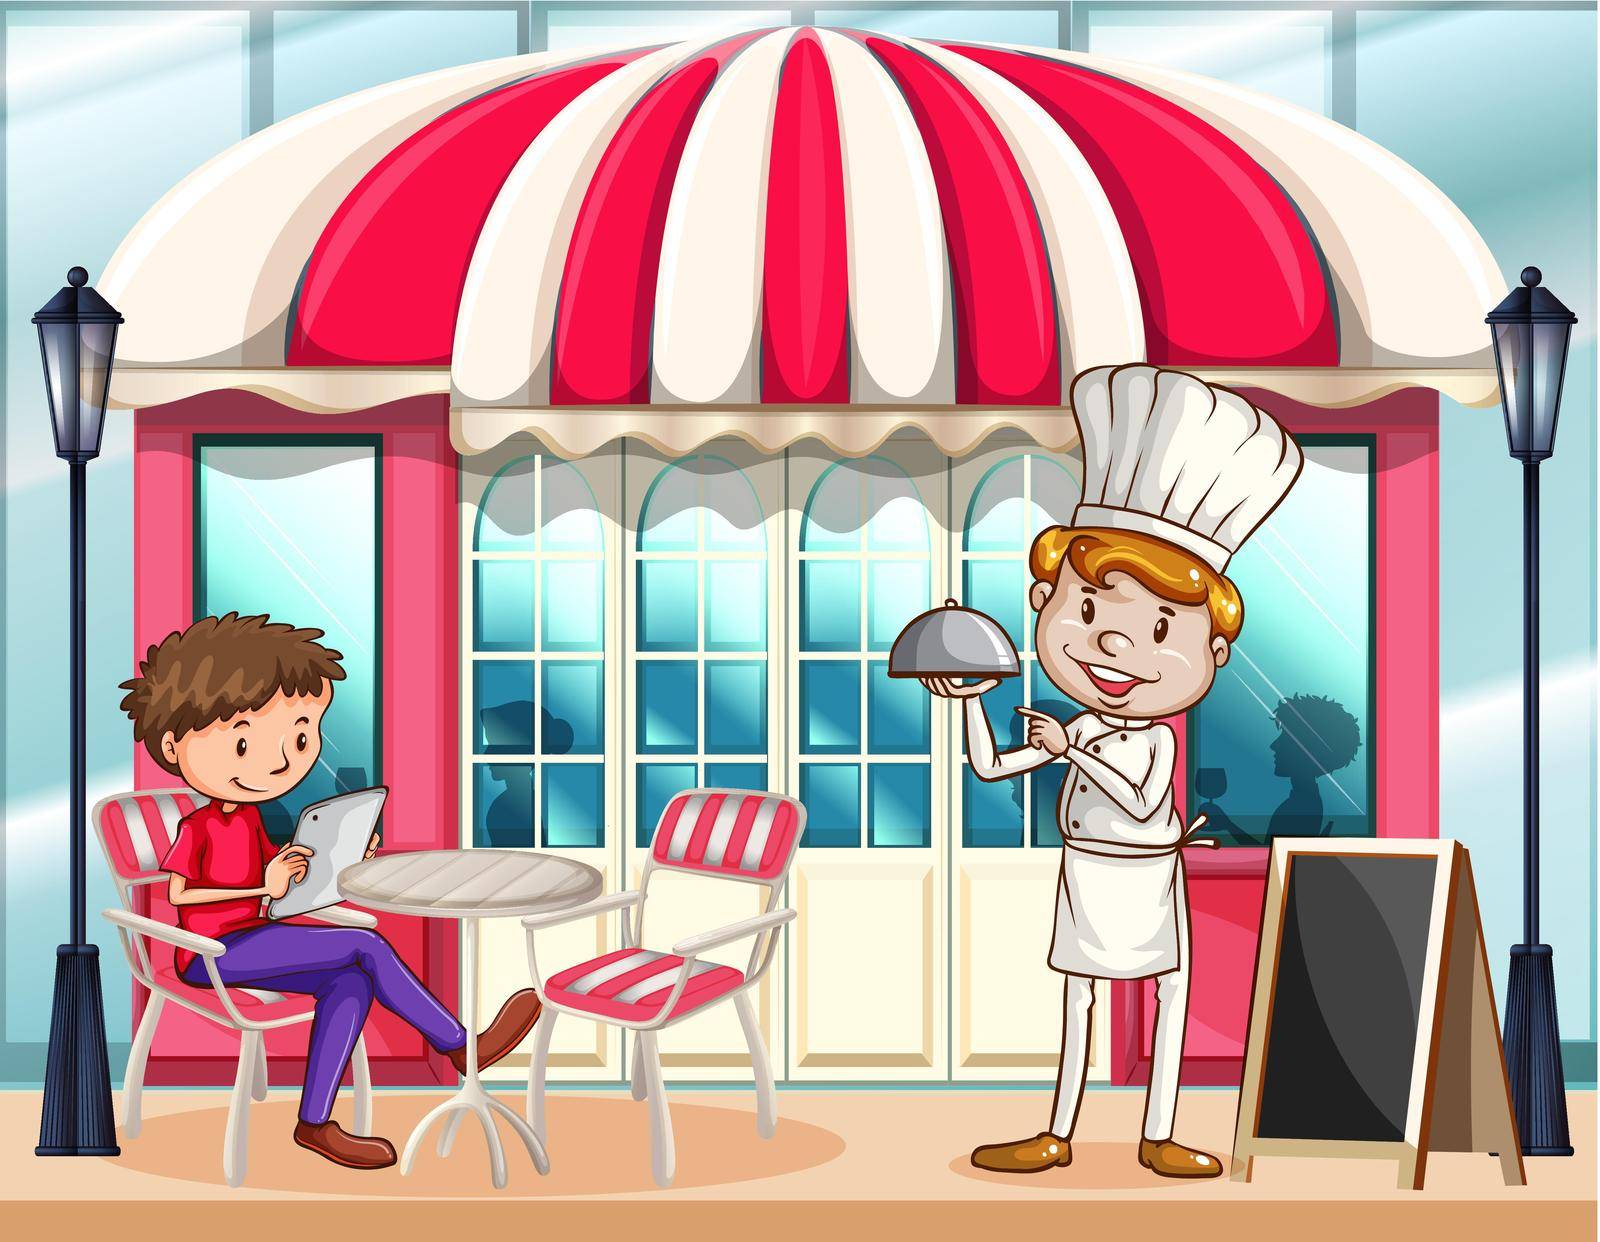 Cafe scene with chef and customer illustration